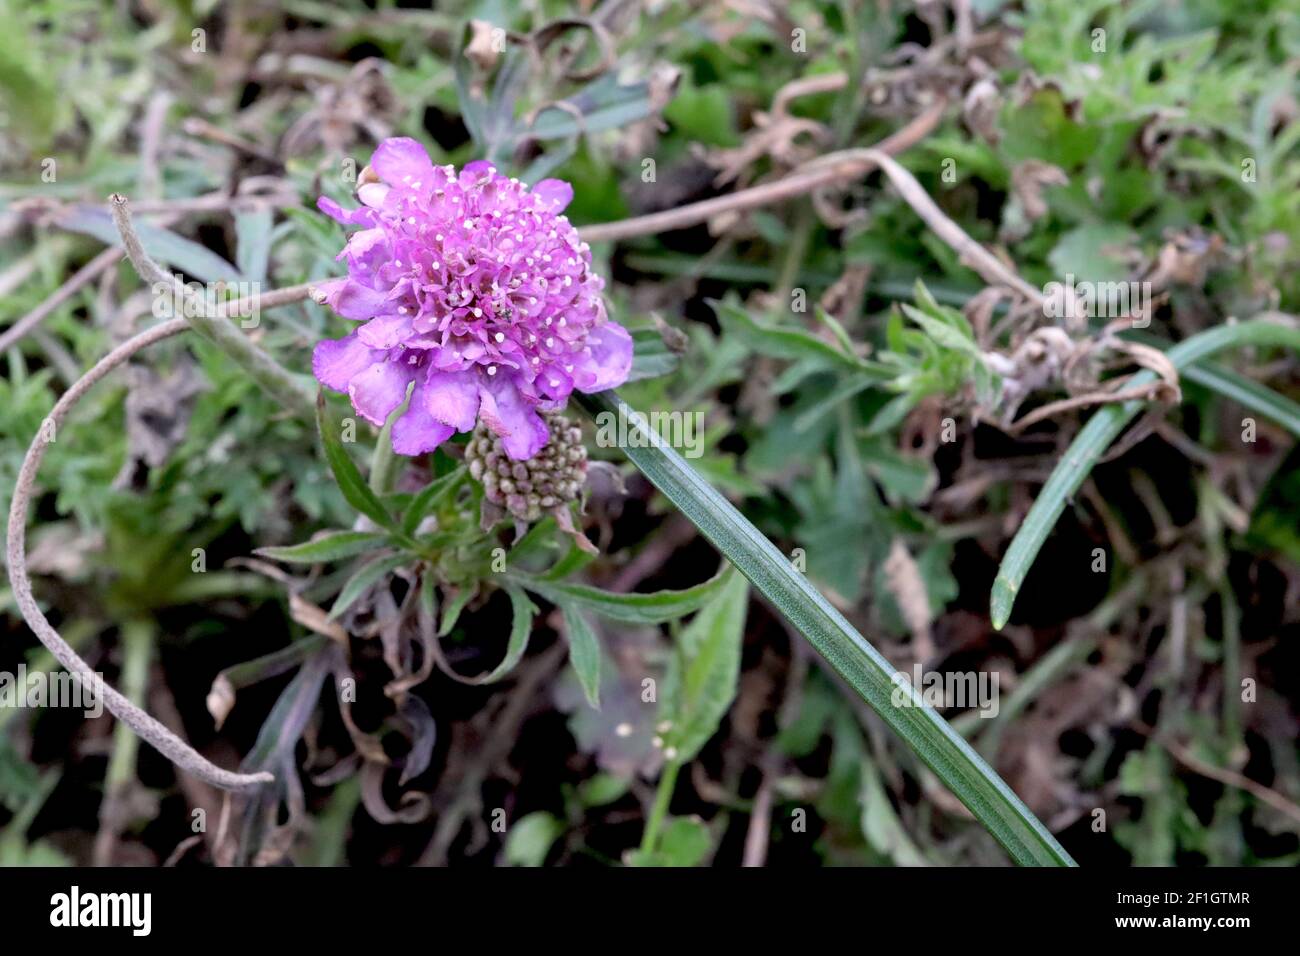 Scabiosa columbaria ‘Pink Mist’ Scabious Pink Mist – pink pincushion flower with bending stem, March, England, UK Stock Photo